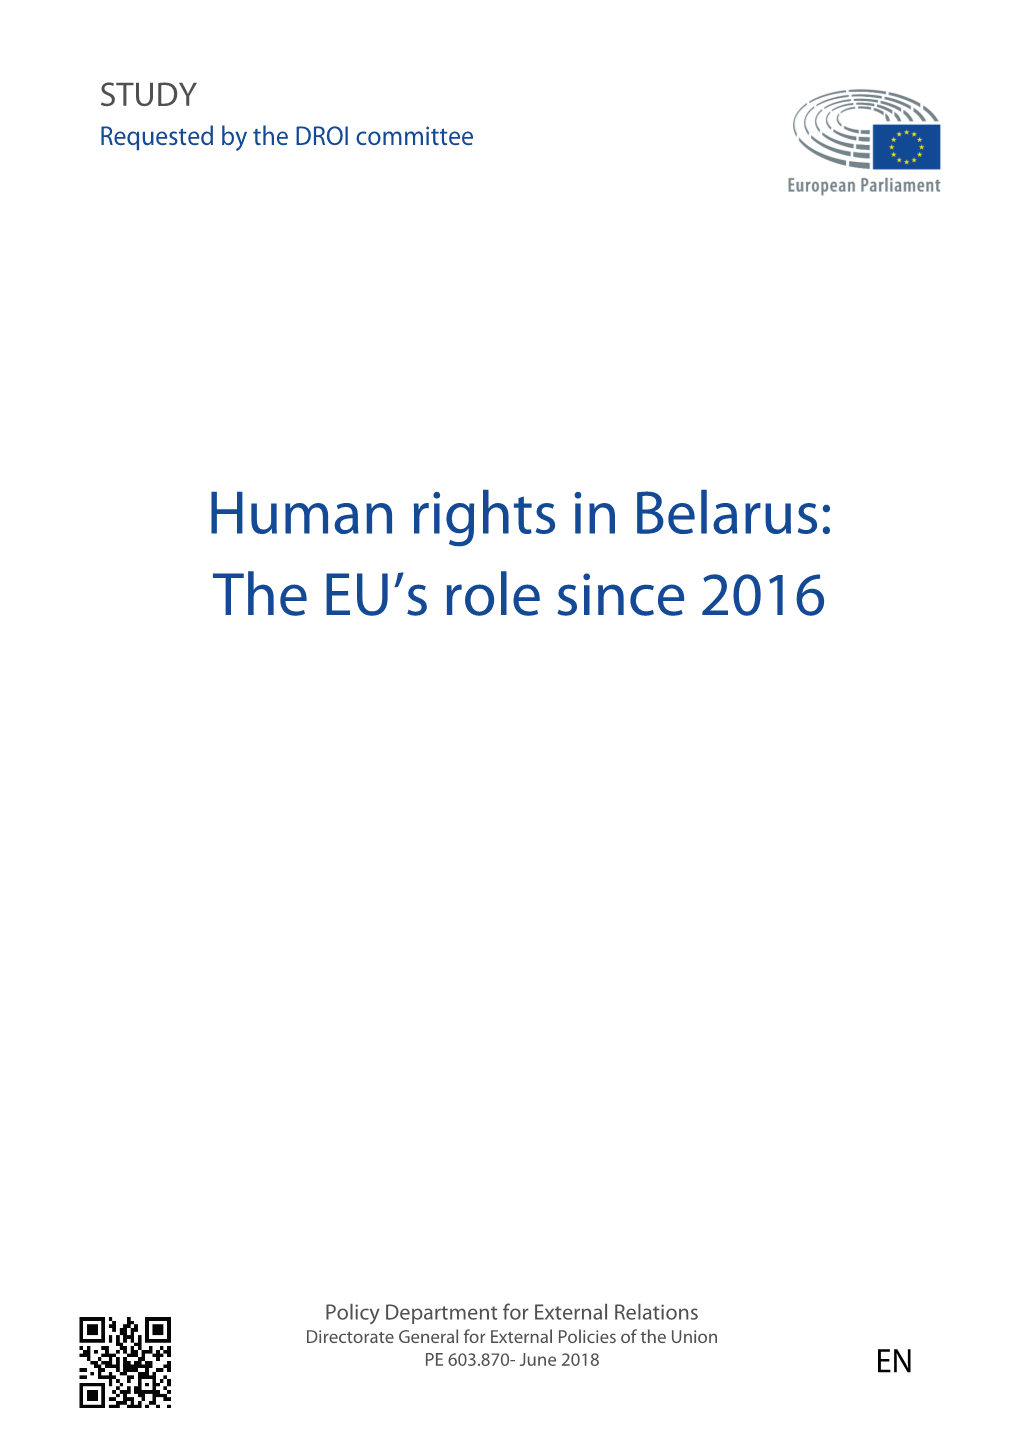 Human Rights in Belarus: the EU's Role Since 2016